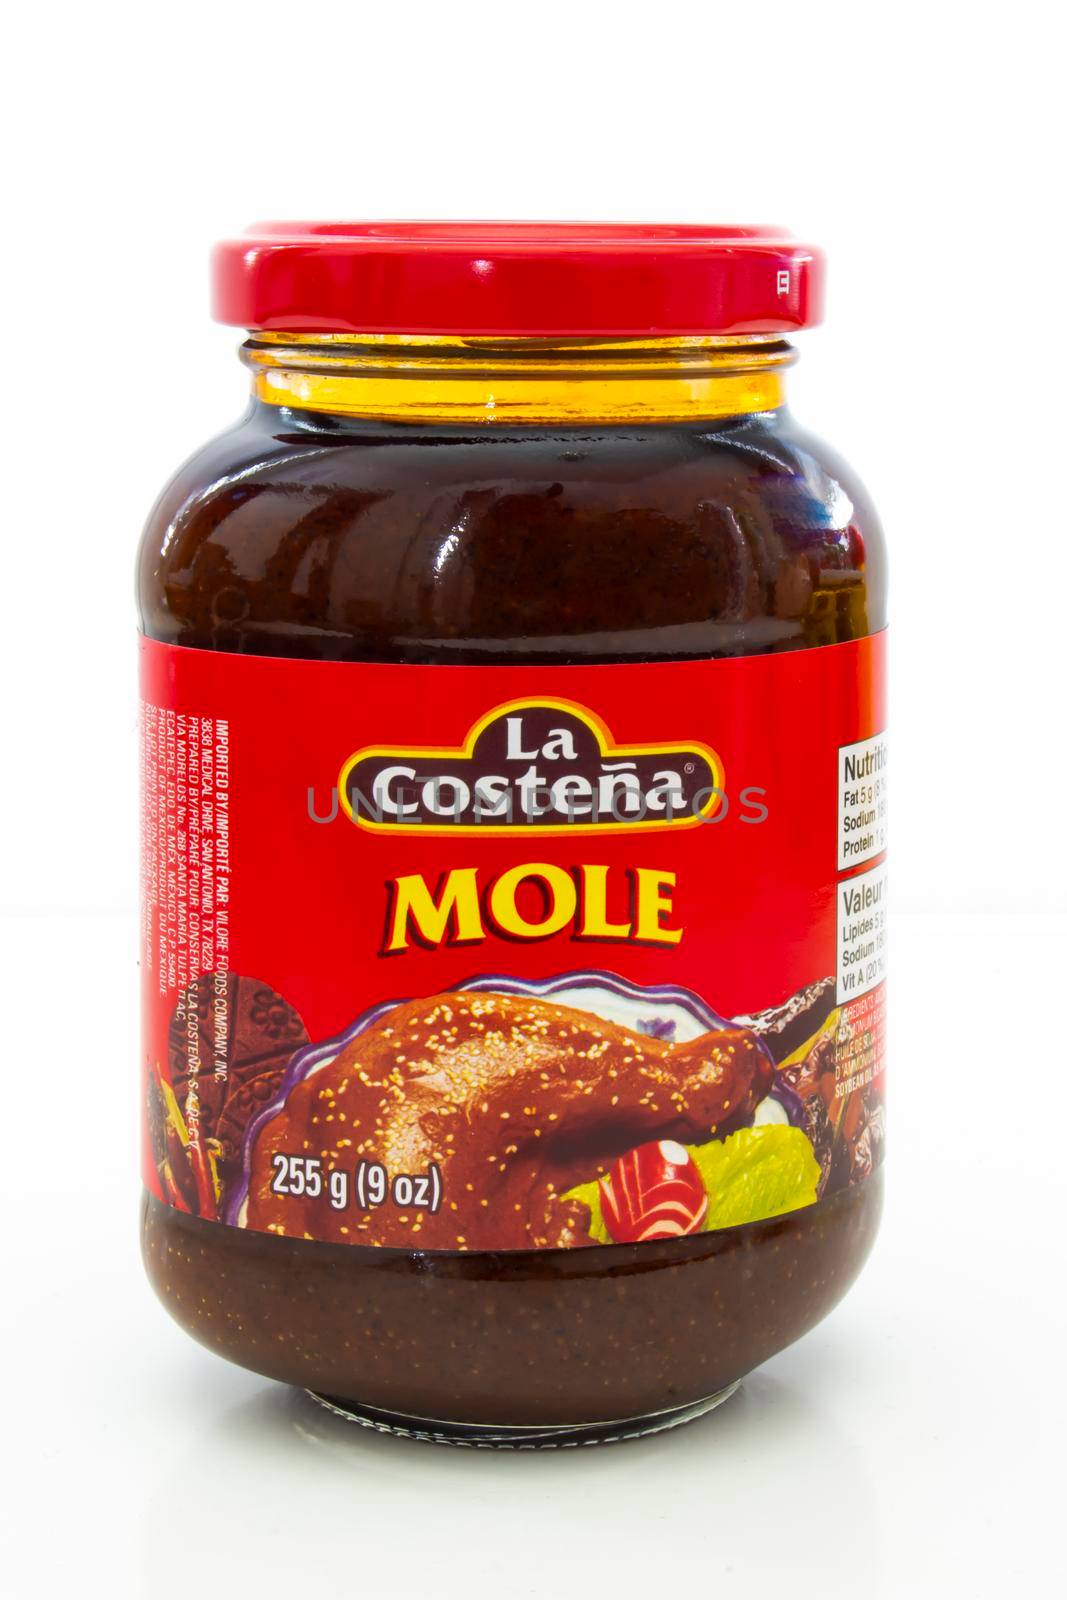 Calgary Alberta, Canada. May 1, 2021. Mole brand la costeña, is a traditional marinade and sauce originally used in Mexican cuisine. by oasisamuel